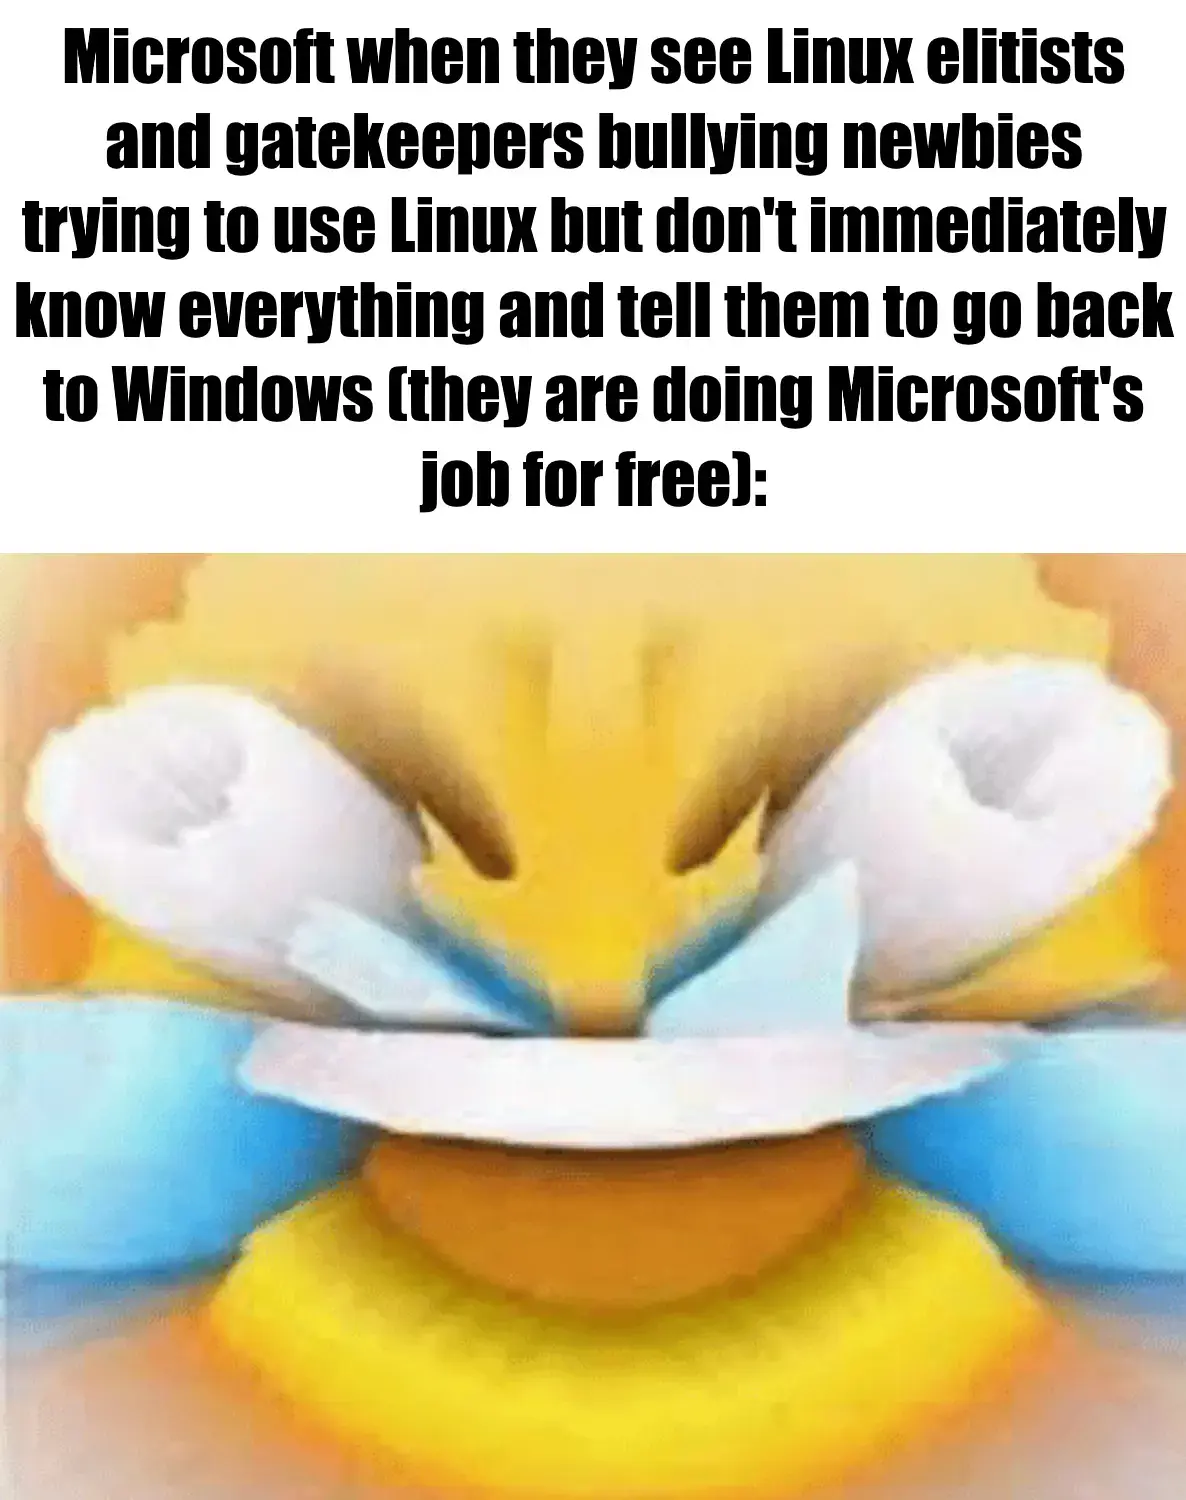 Microsoft when they see Linux elitists and gatekeepers bullying newbies trying to use Linux but don't immediately know everything and tell them to go back to Windows (they are doing Microsoft's job for free): <bass-boosted joy/laughter emoji>